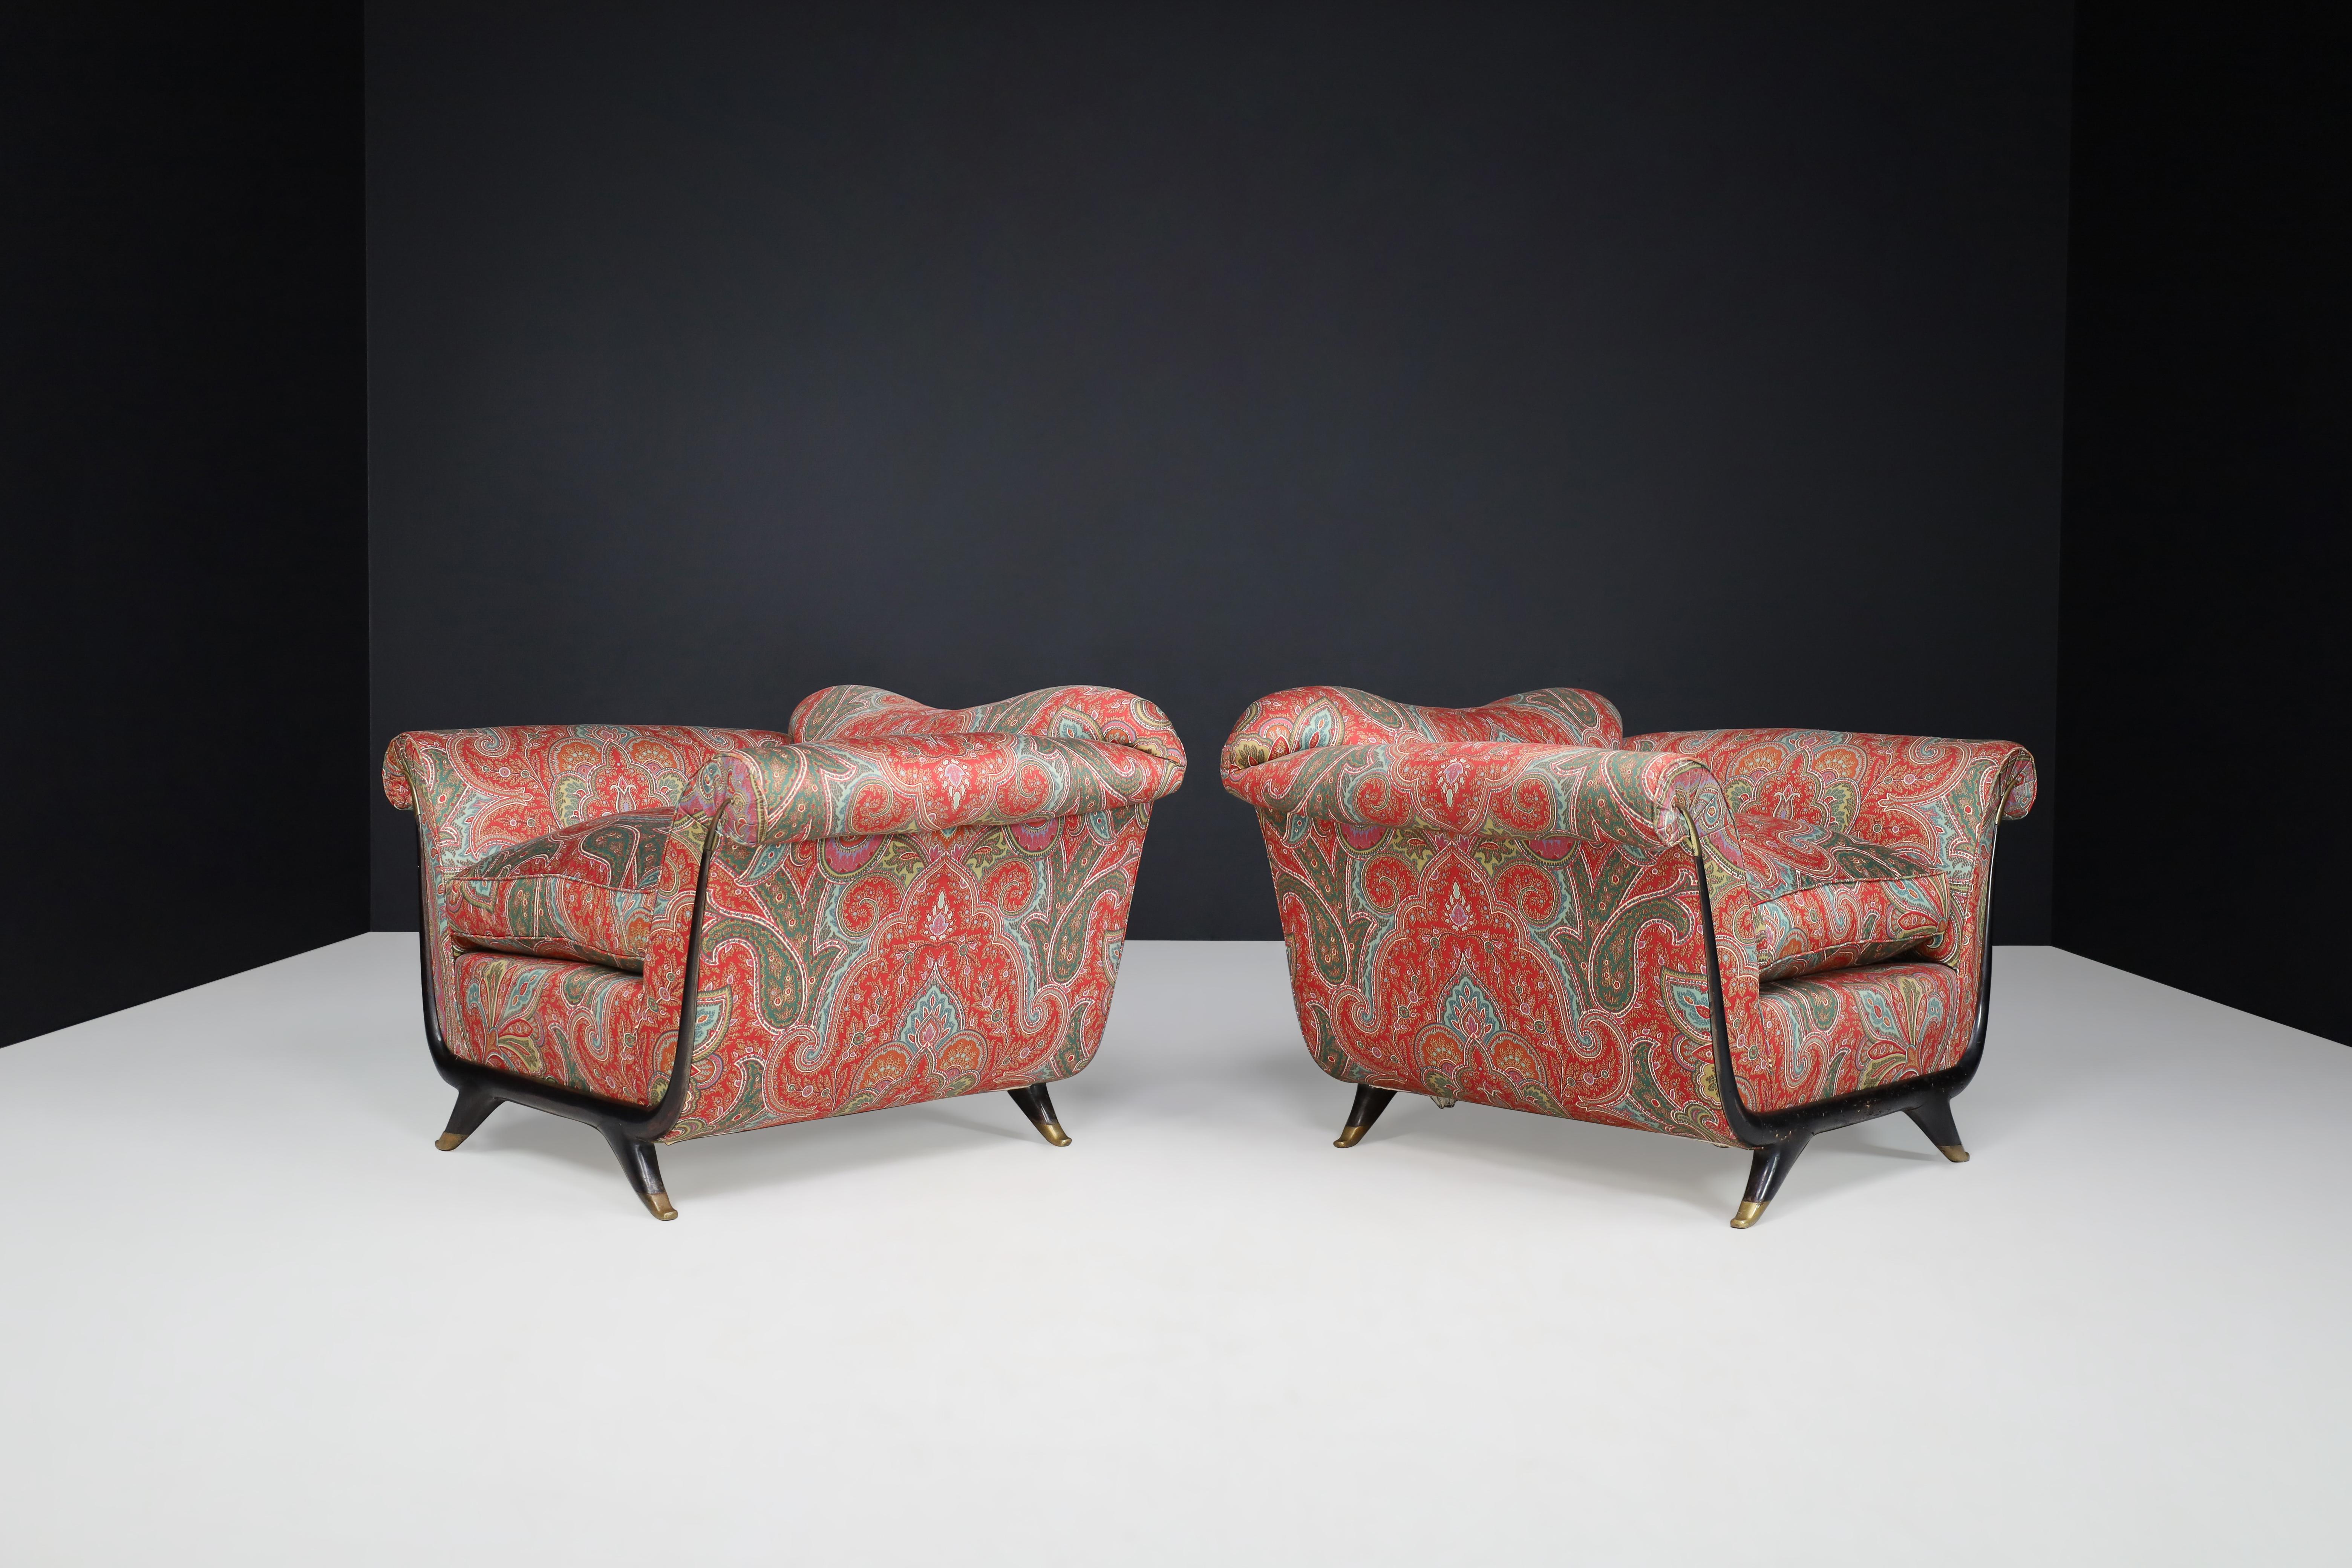 Guglielmo Ulrich Lounge Chairs in Walnut, Fabric, and Brass, Italy, 1930s  For Sale 9